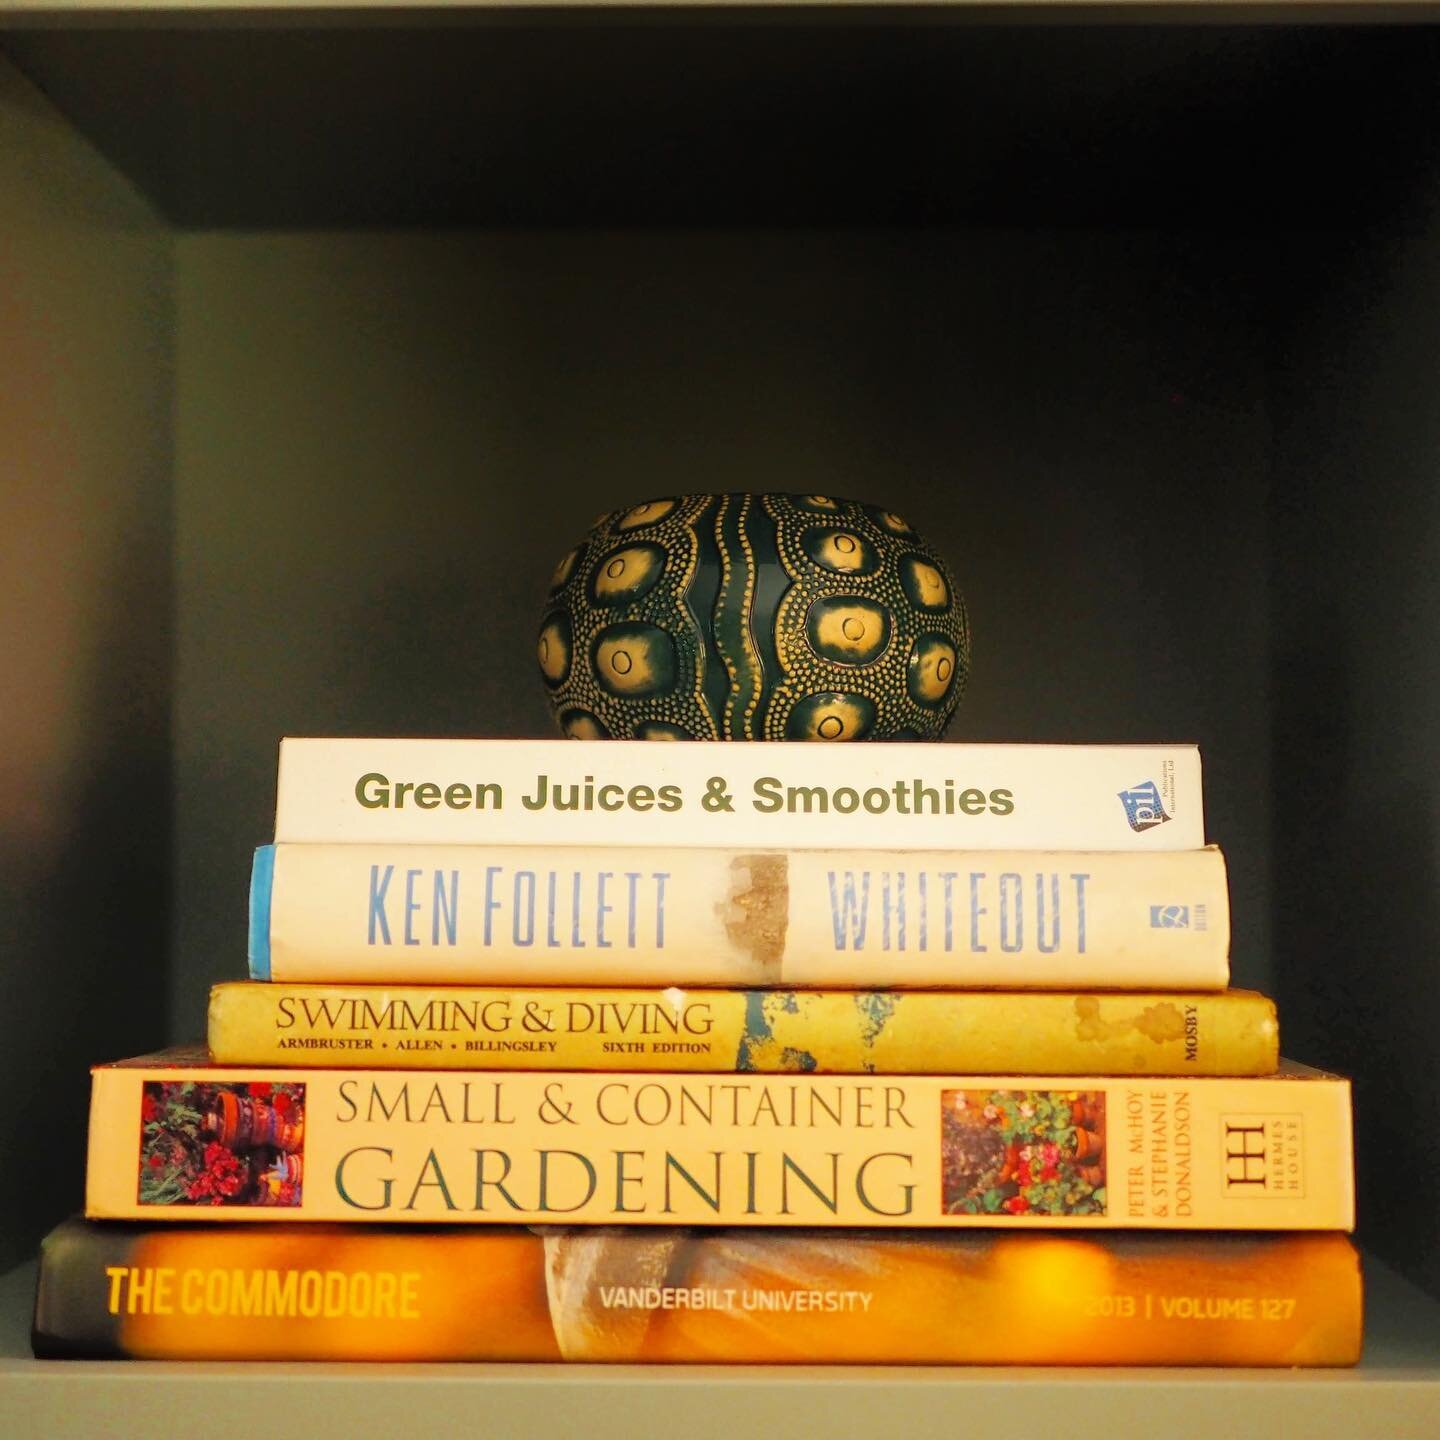 #shelfiesunday Here&rsquo;s a little cubby in my bookshelf. I don&rsquo;t make smoothies but I have this book, lol. Are you into smoothies? 

Also, then ceramic bowl is from @threedotsandadash - I have no idea how it was acquired! 

#airplanegames #h